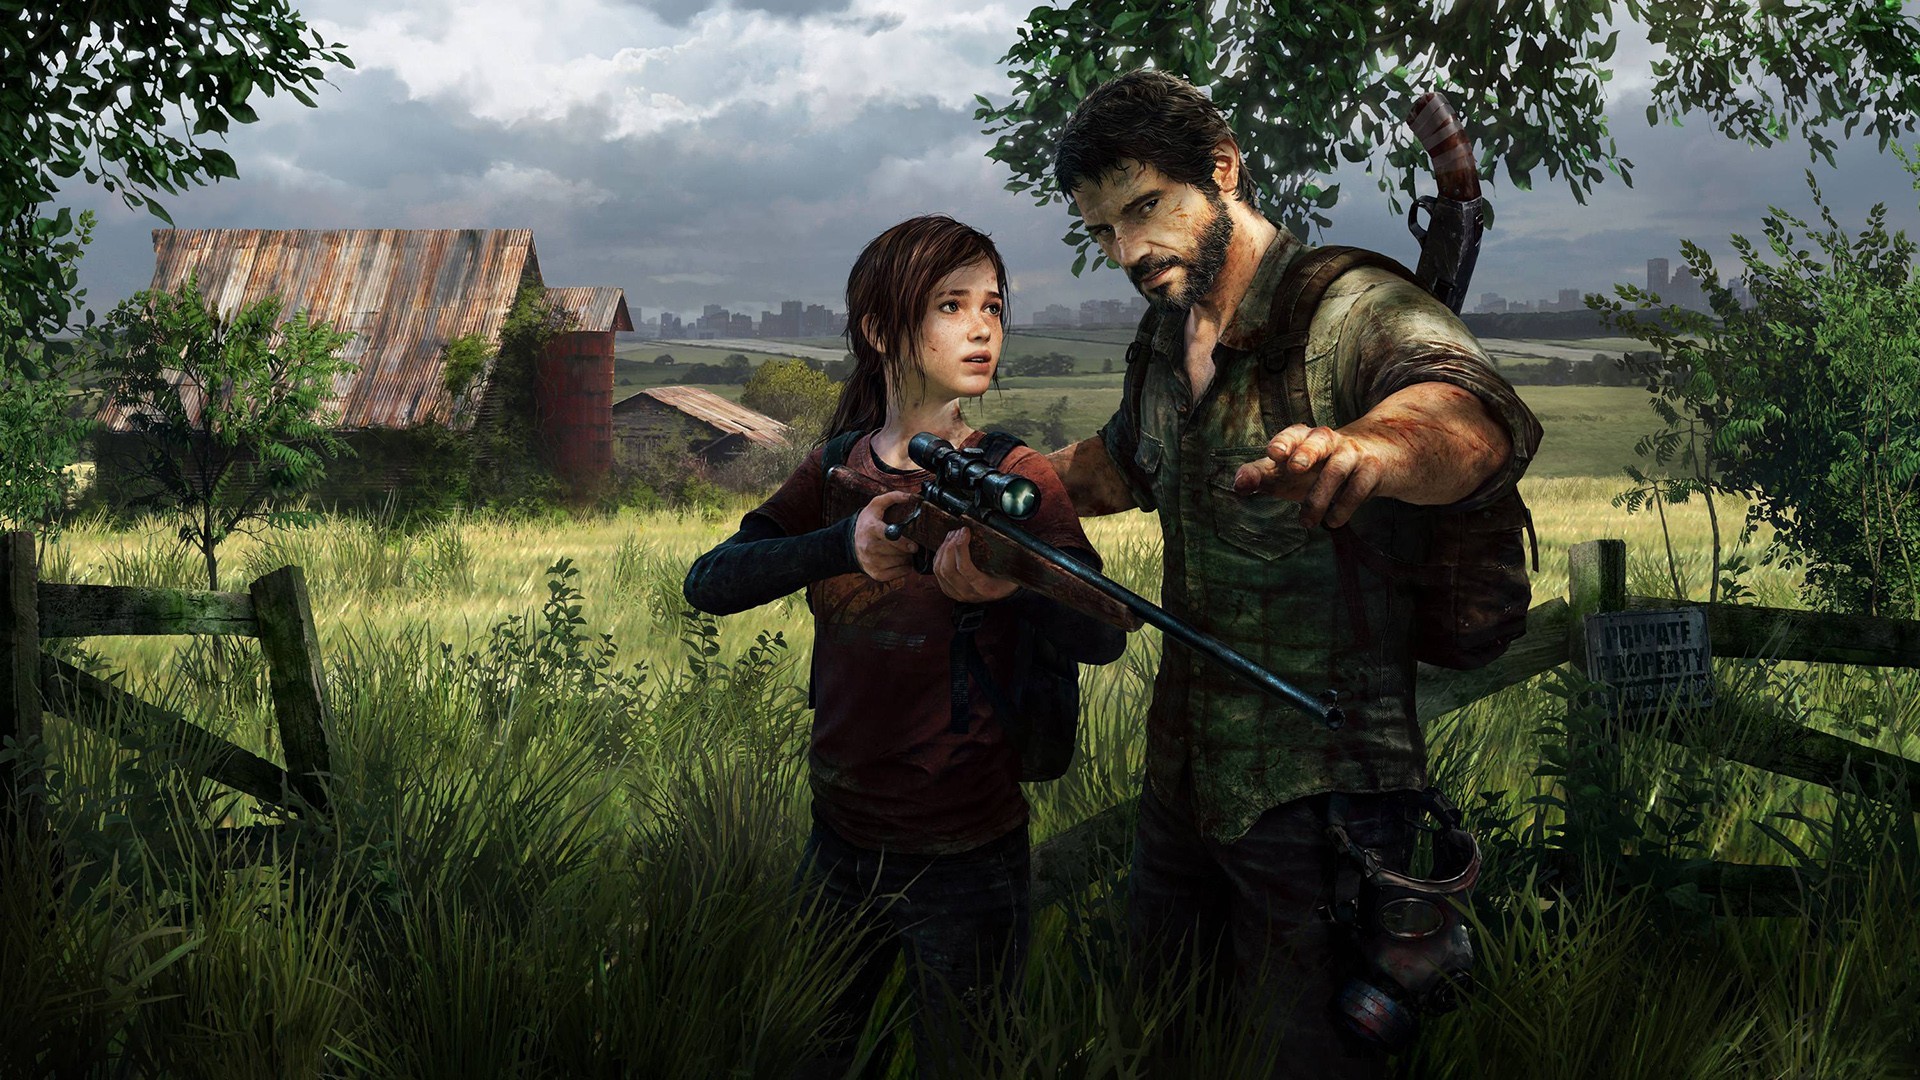 General 1920x1080 The Last of Us sniper rifle rifles video games artwork apocalyptic field grass fence cityscape finger pointing Joel Miller barns video game art PlayStation 3 gas masks video game girls video game characters video game men girls with guns weapon Ellie Williams